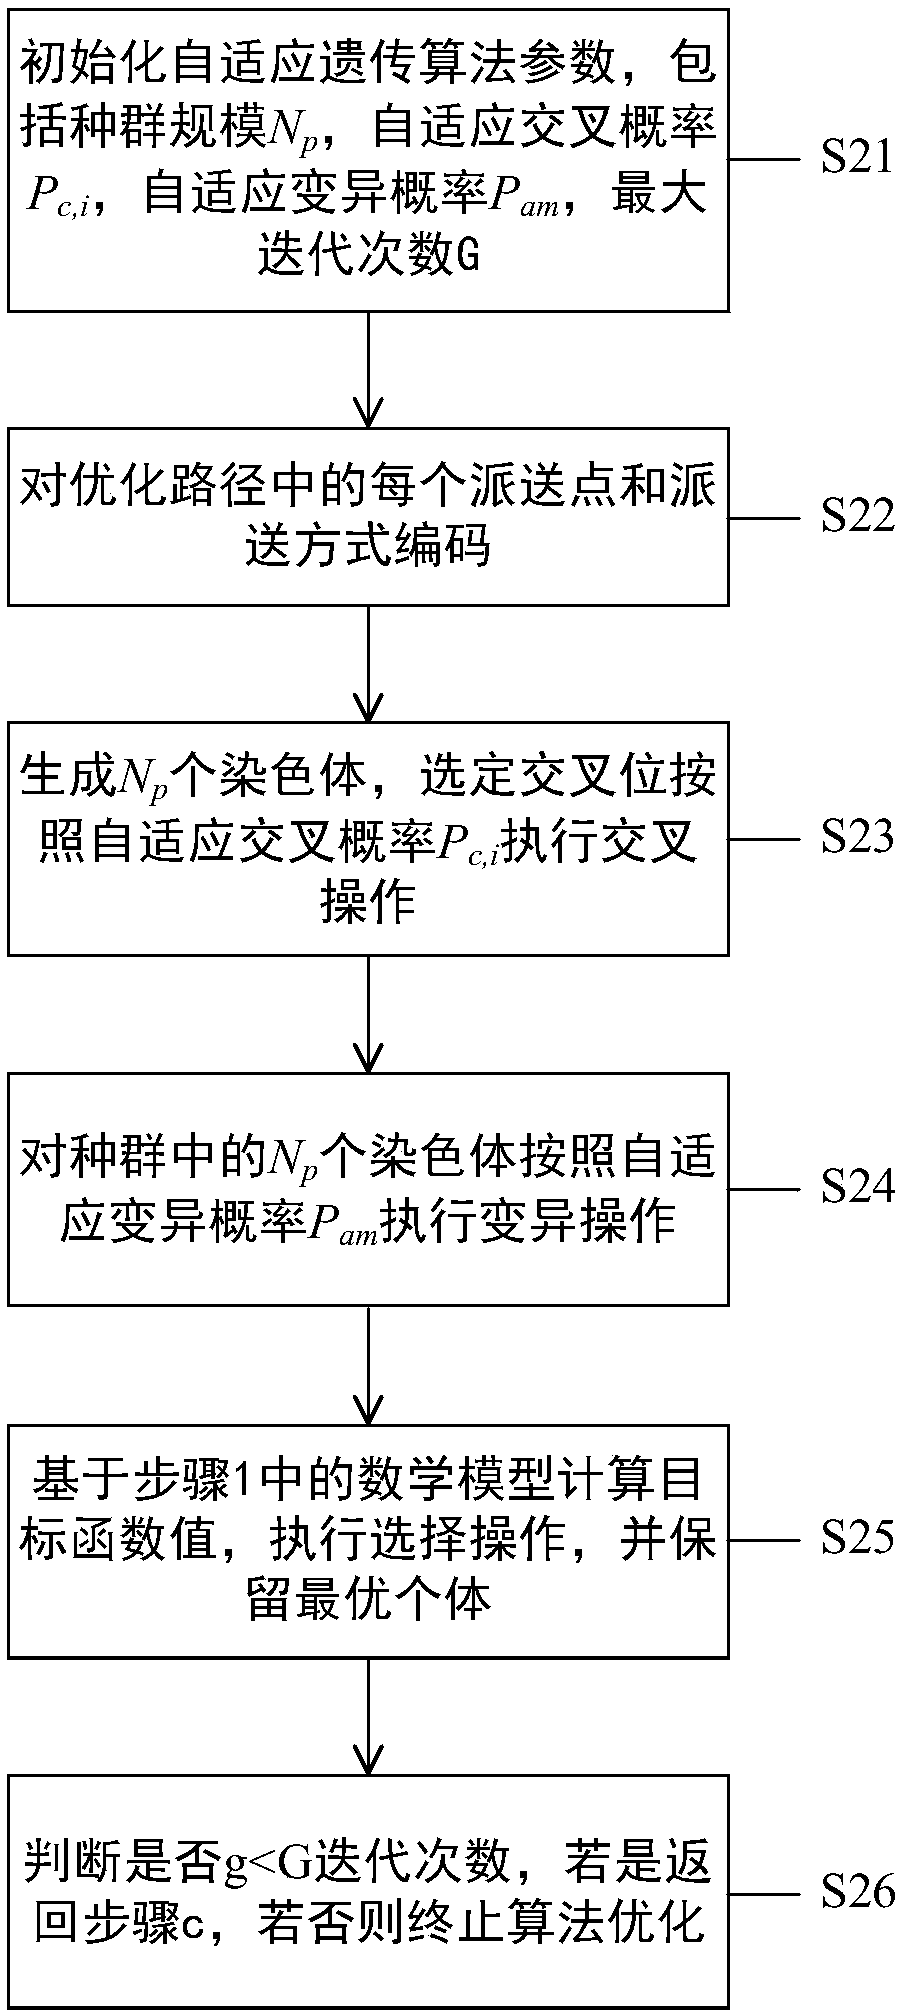 Multimodal transport route optimization method and system